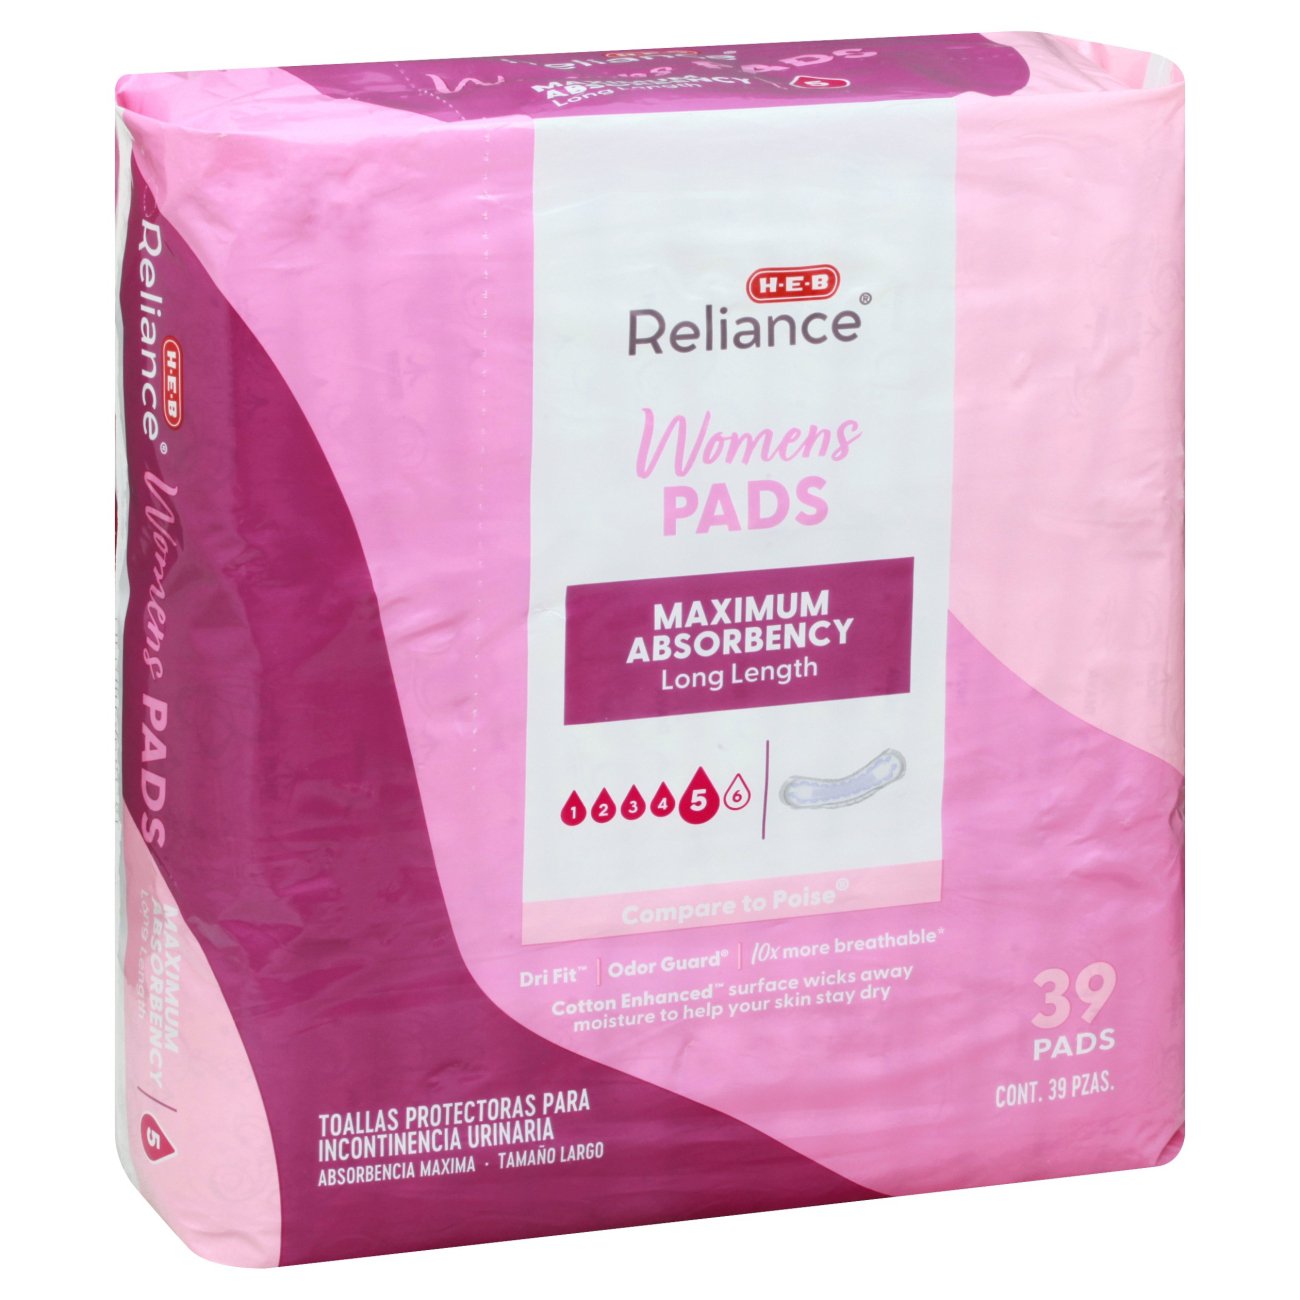 Incontinence Pads - Maximum Absorbency - Long - 39ct - Up & Up™ : Target